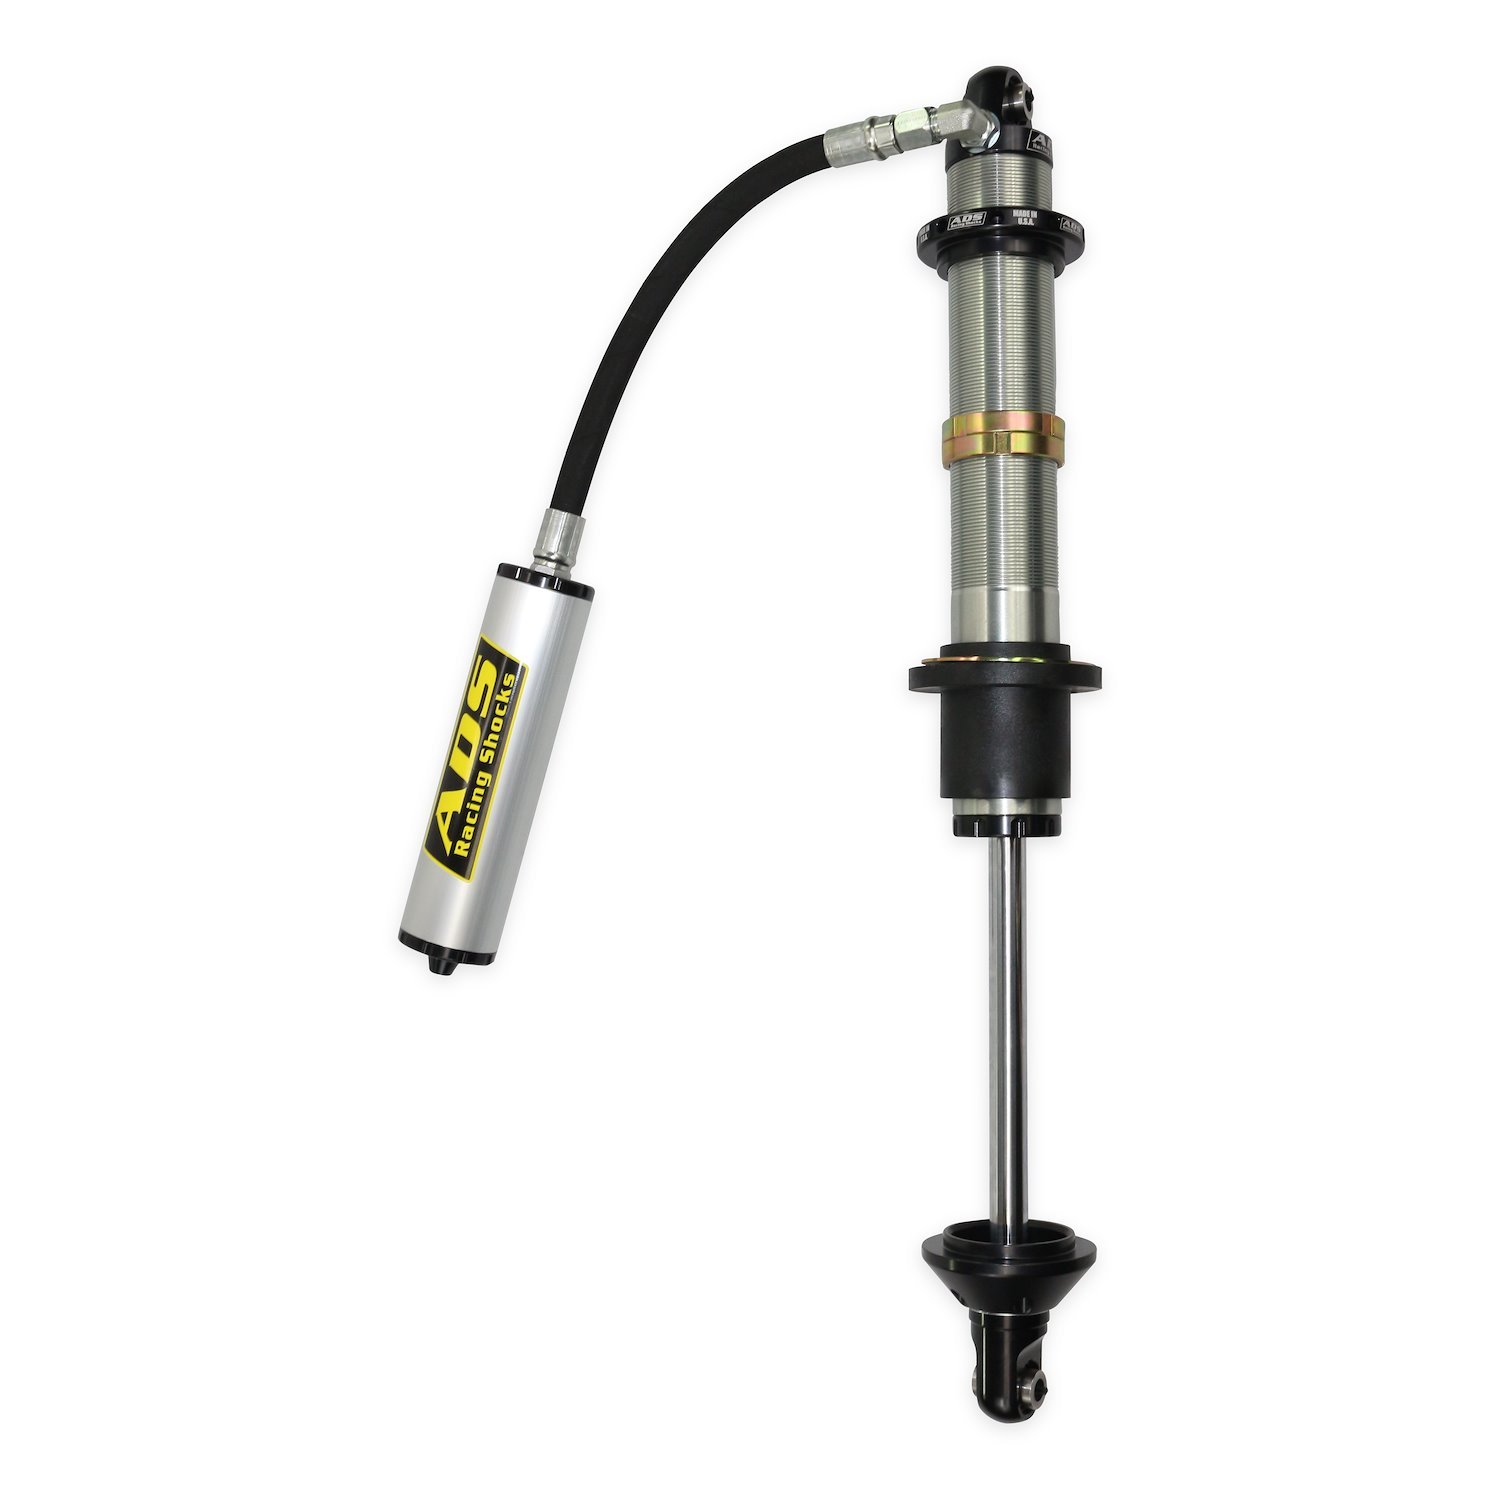 250-COR18-900 Coil-Over Race Shock, 2.5 in. x 18 in. Stroke, w/ Remote Reservoir (90-Degree Hose)